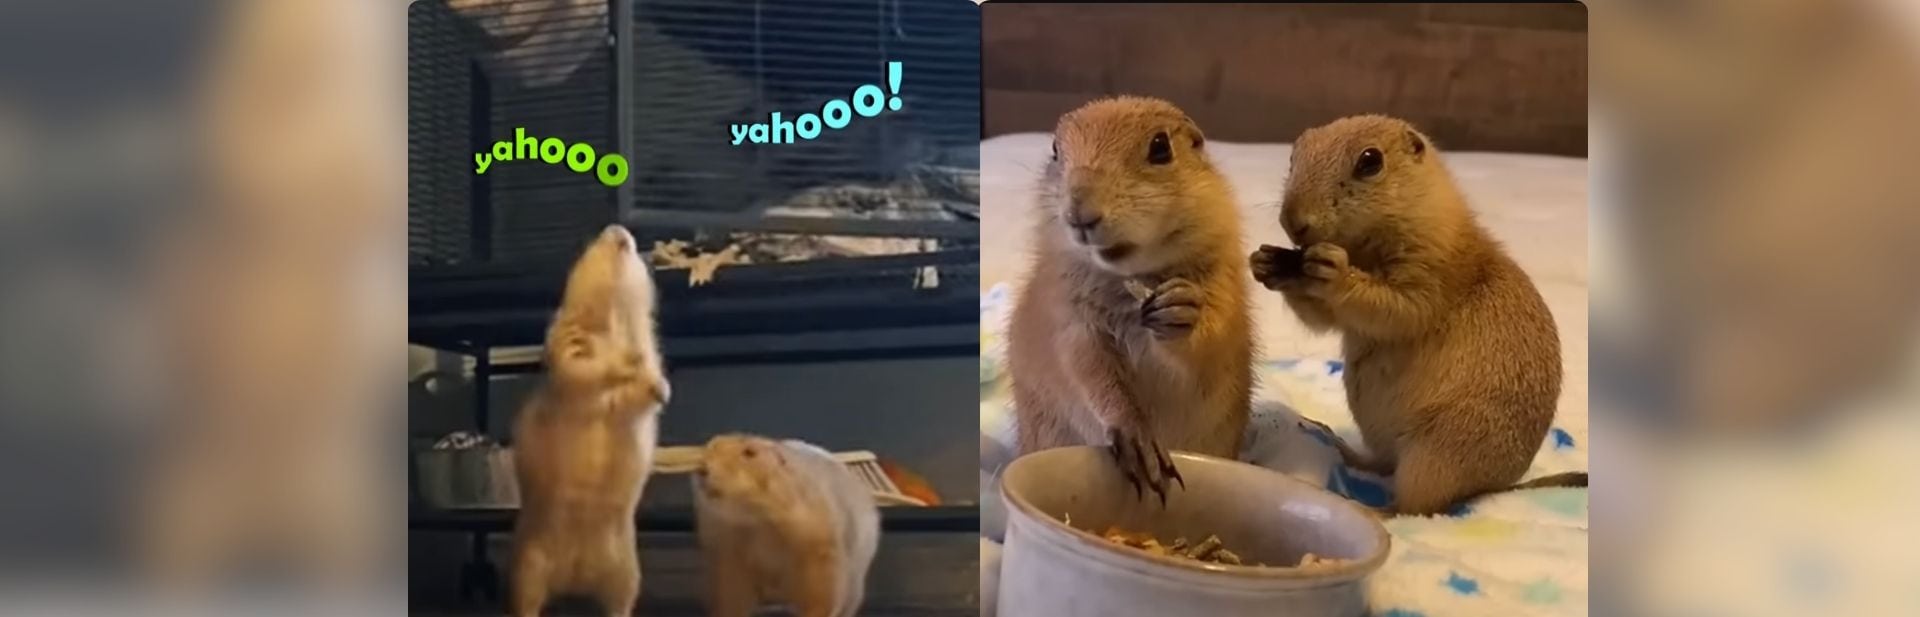 These Prairie Dogs Have the Cutest “Yahoo” Wake-Up Call